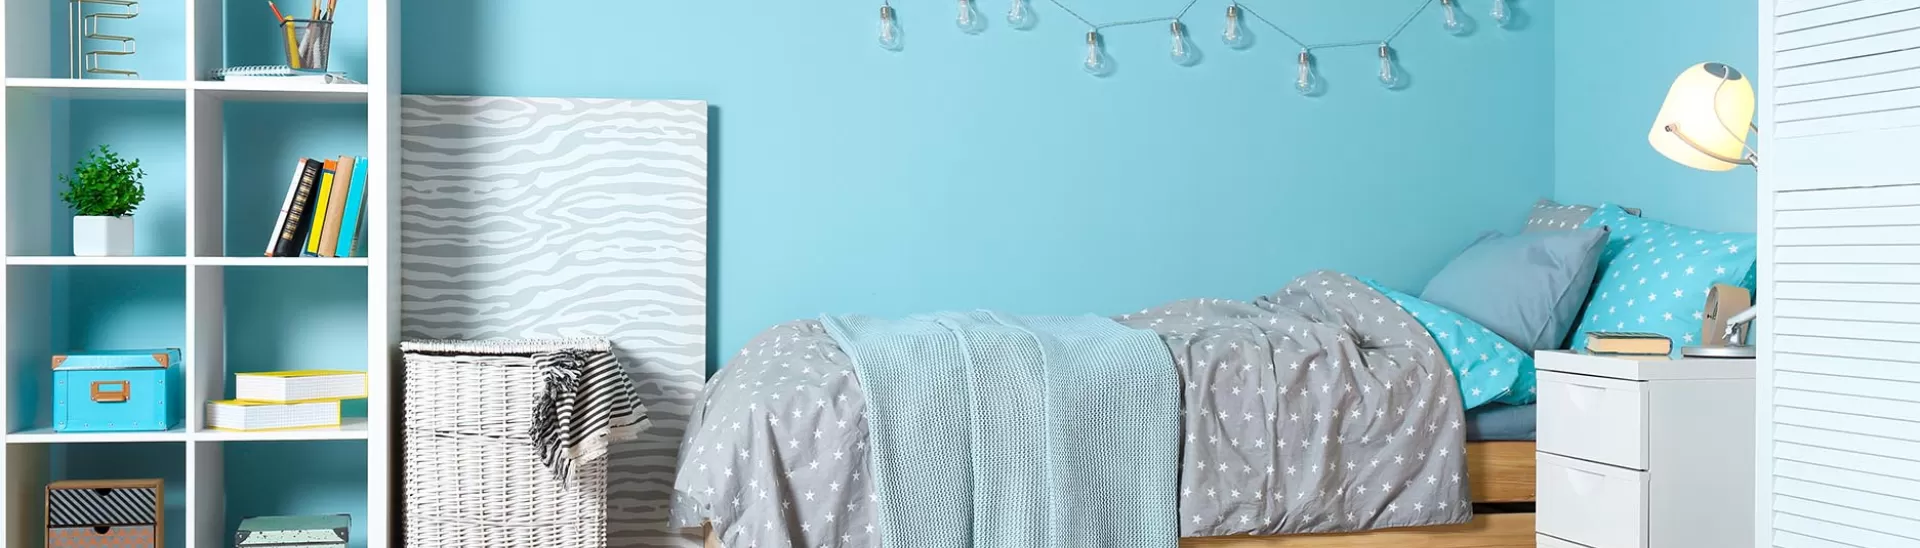 How To Select the Right Colour Shades For Kids Bedroom